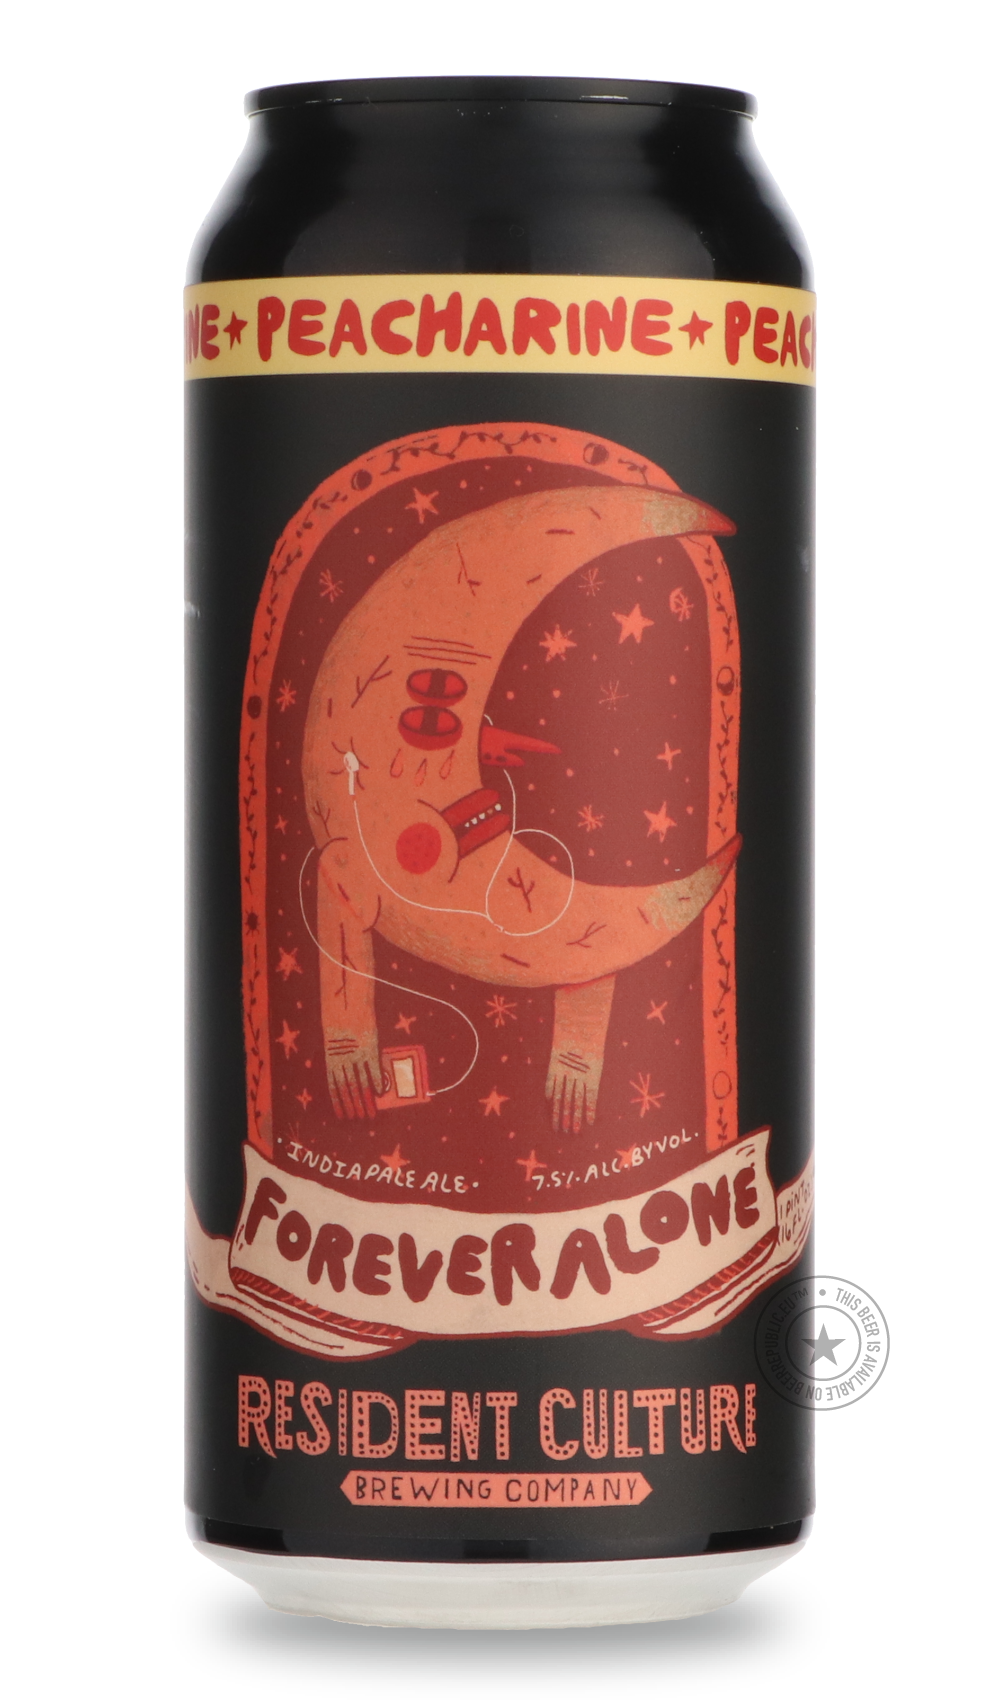 -Resident Culture- Forever Alone: Peacharine-IPA- Only @ Beer Republic - The best online beer store for American & Canadian craft beer - Buy beer online from the USA and Canada - Bier online kopen - Amerikaans bier kopen - Craft beer store - Craft beer kopen - Amerikanisch bier kaufen - Bier online kaufen - Acheter biere online - IPA - Stout - Porter - New England IPA - Hazy IPA - Imperial Stout - Barrel Aged - Barrel Aged Imperial Stout - Brown - Dark beer - Blond - Blonde - Pilsner - Lager - Wheat - Weize